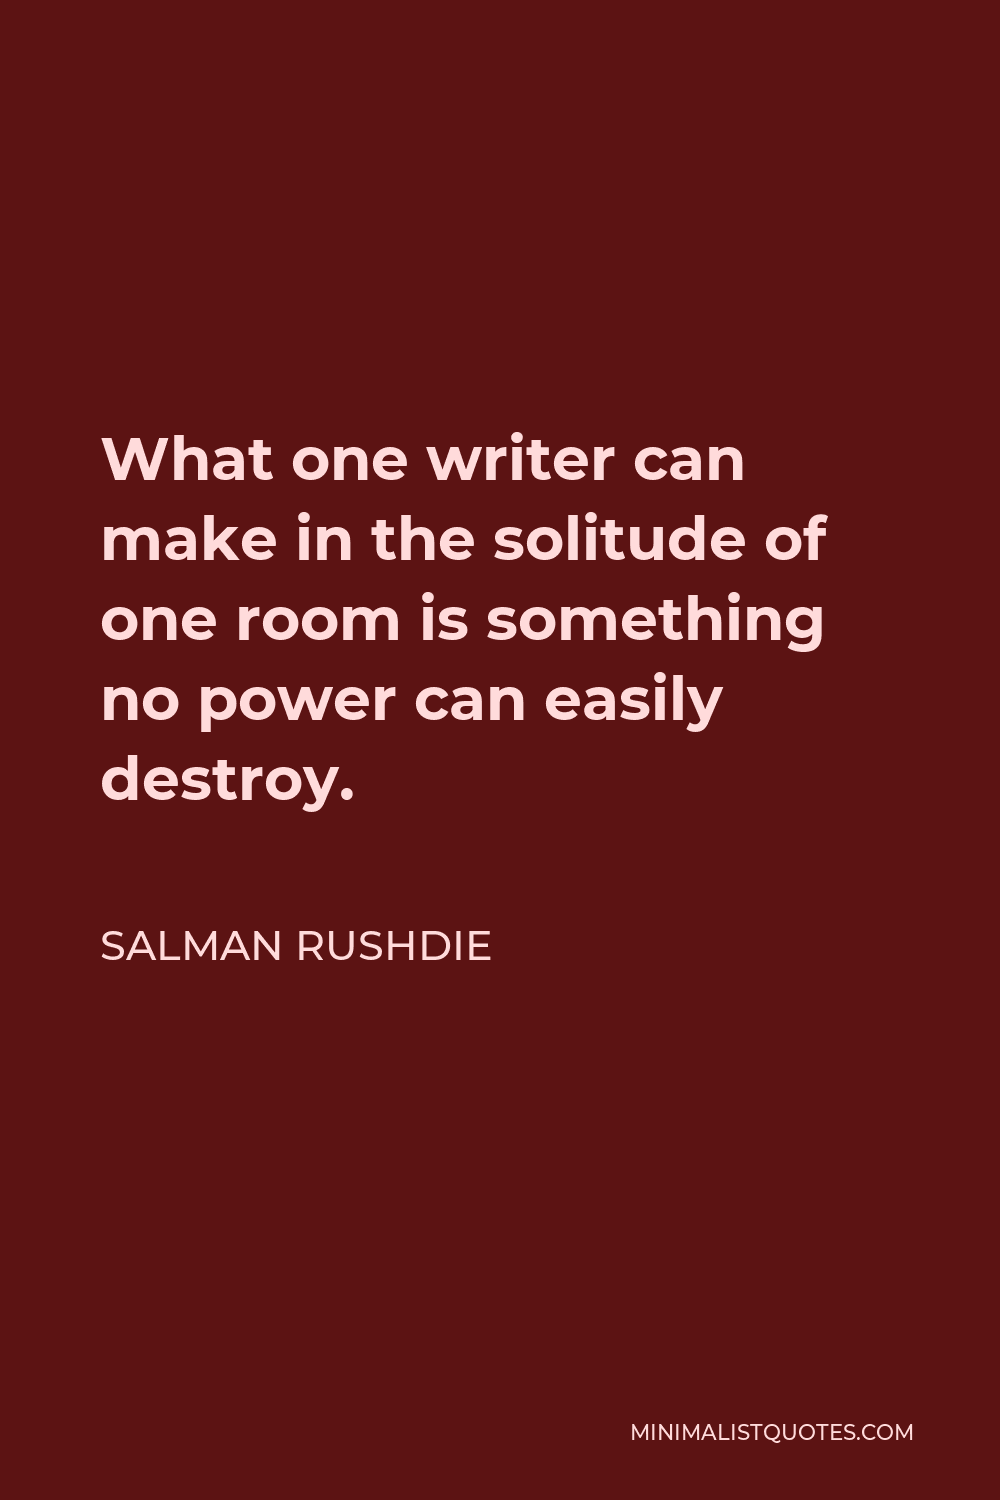 Salman Rushdie Quote - What one writer can make in the solitude of one room is something no power can easily destroy.